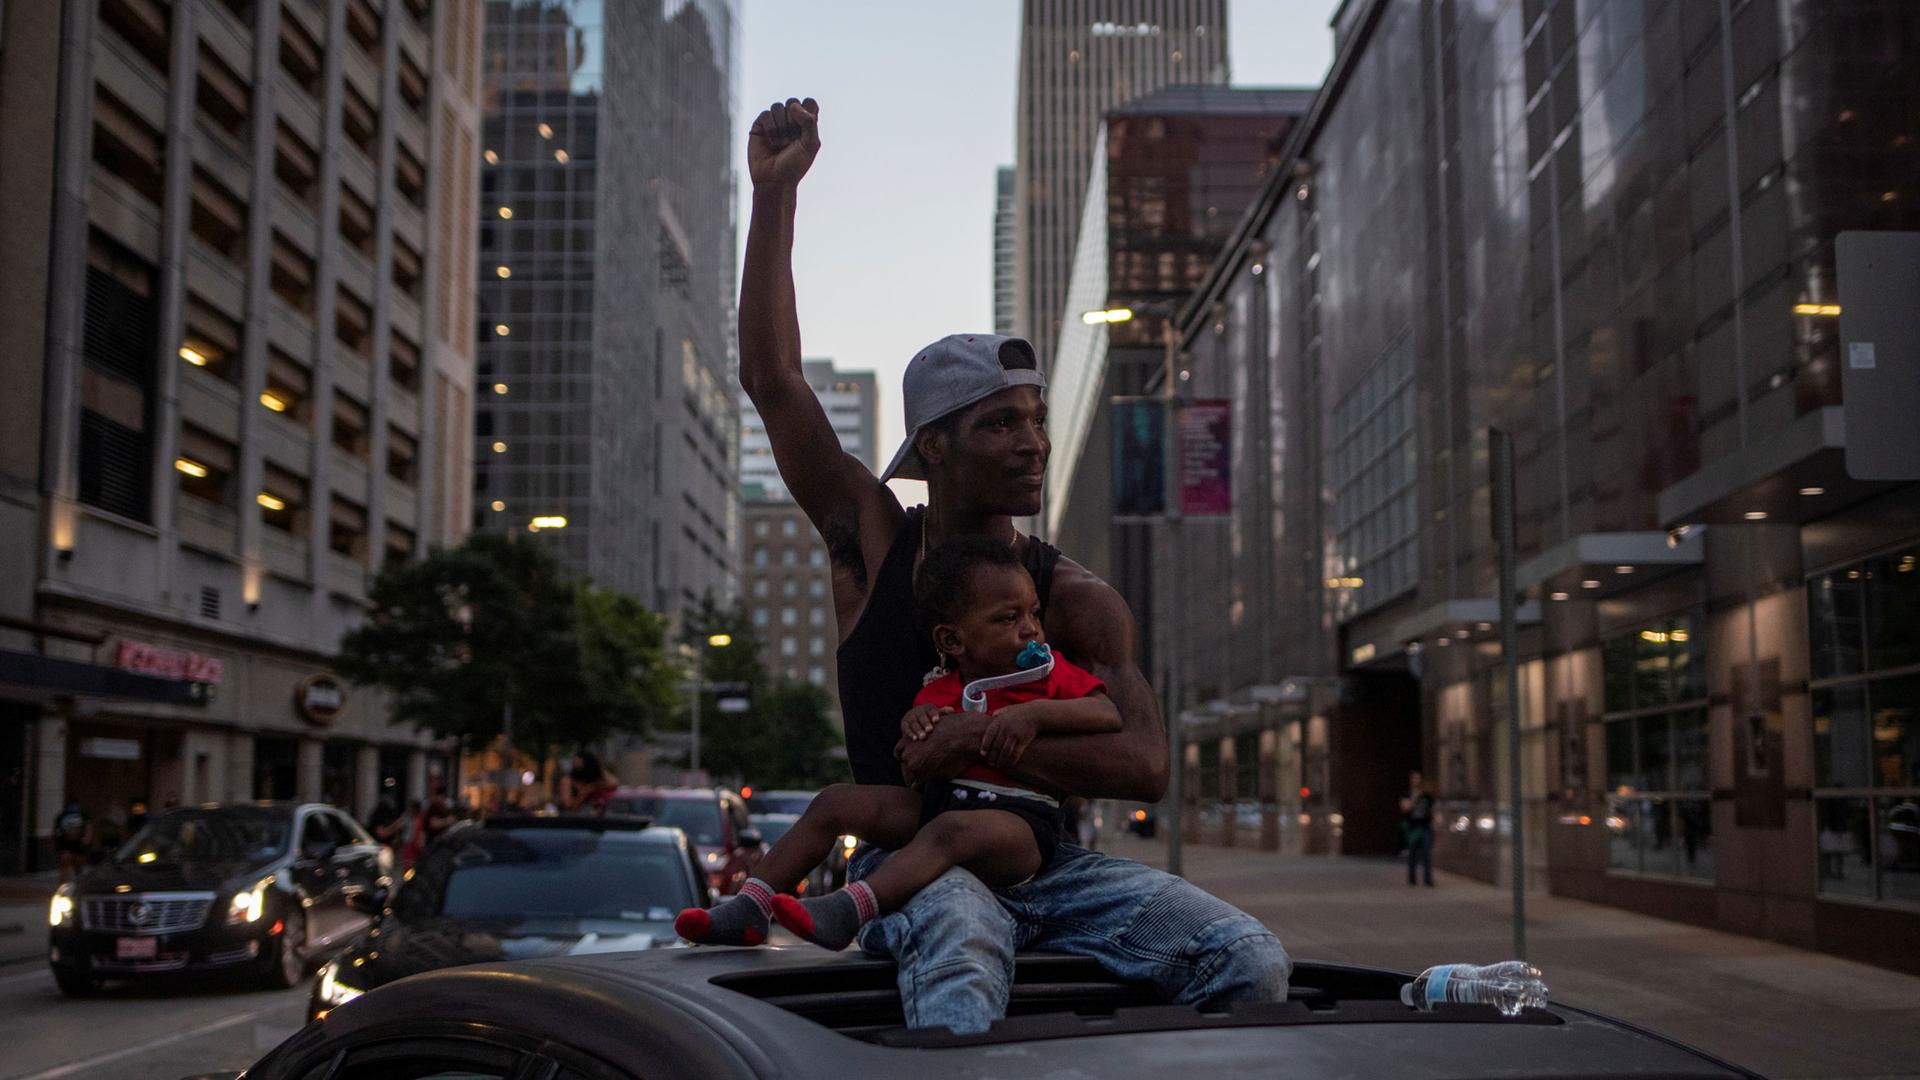 A man is shown sitting on the roof of his car through the sunroof and hold a young child in his lap while raising his fist.